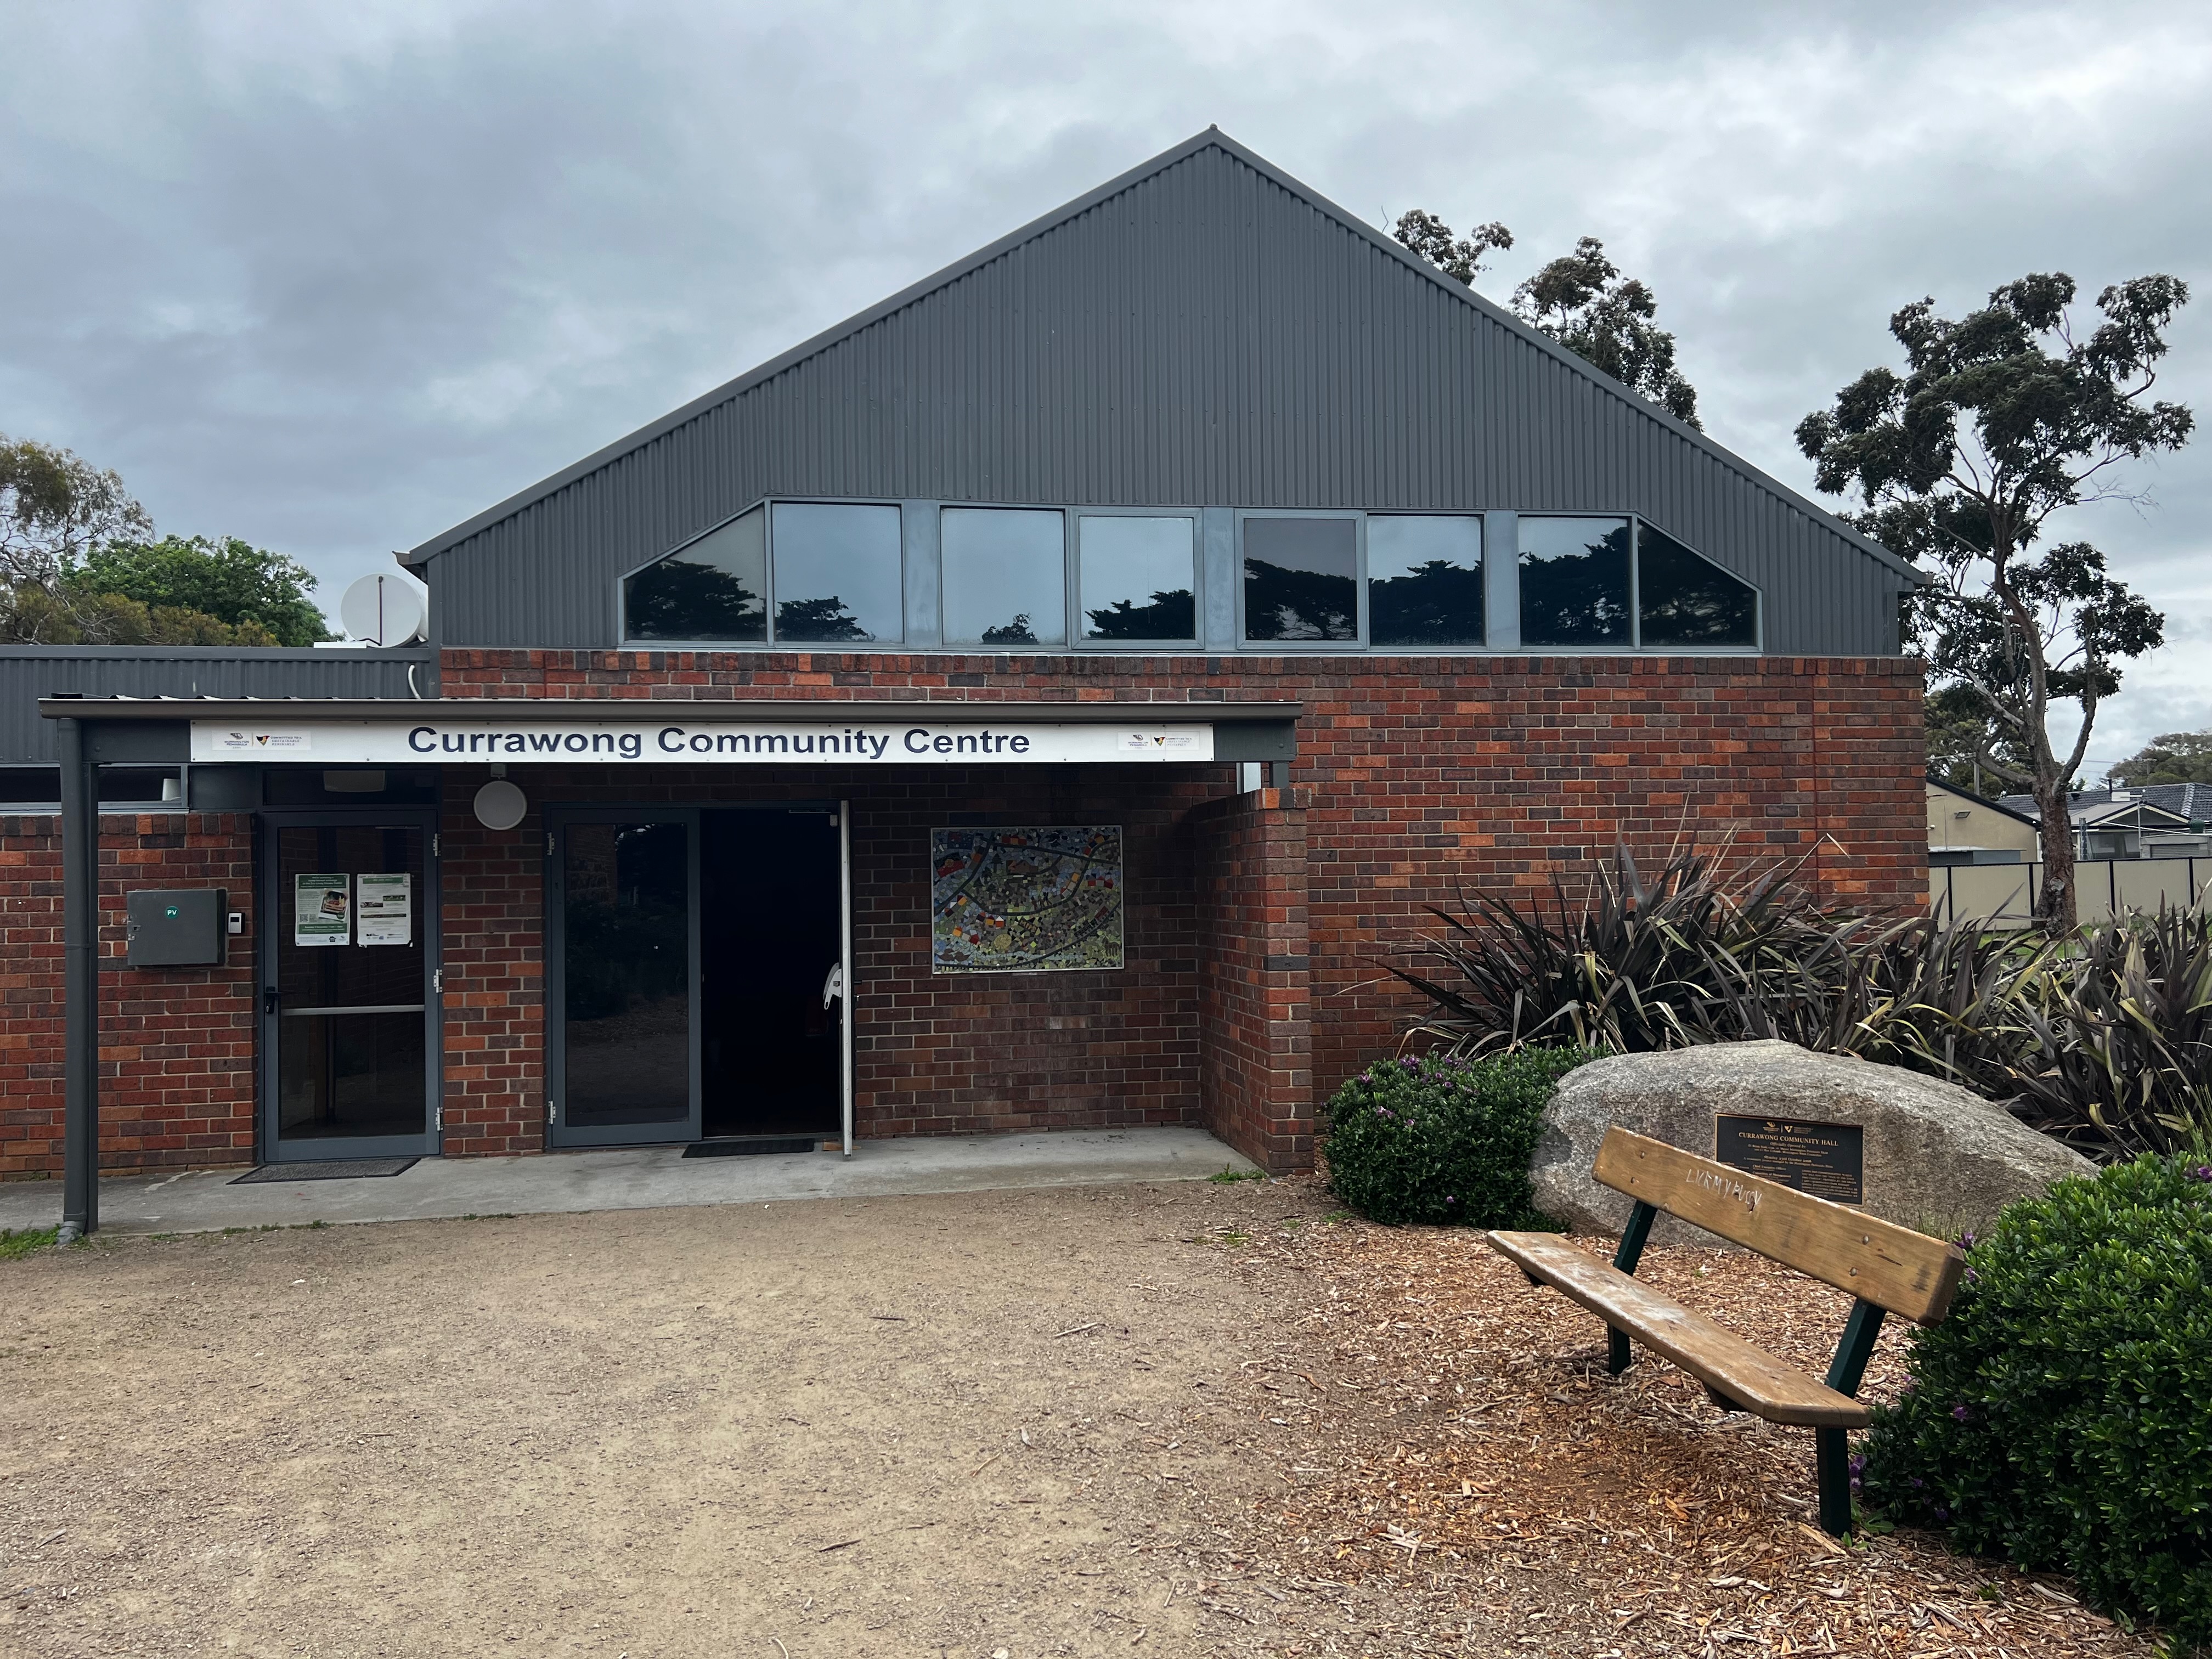 The front entrance into the Currawong Community Centre Hall